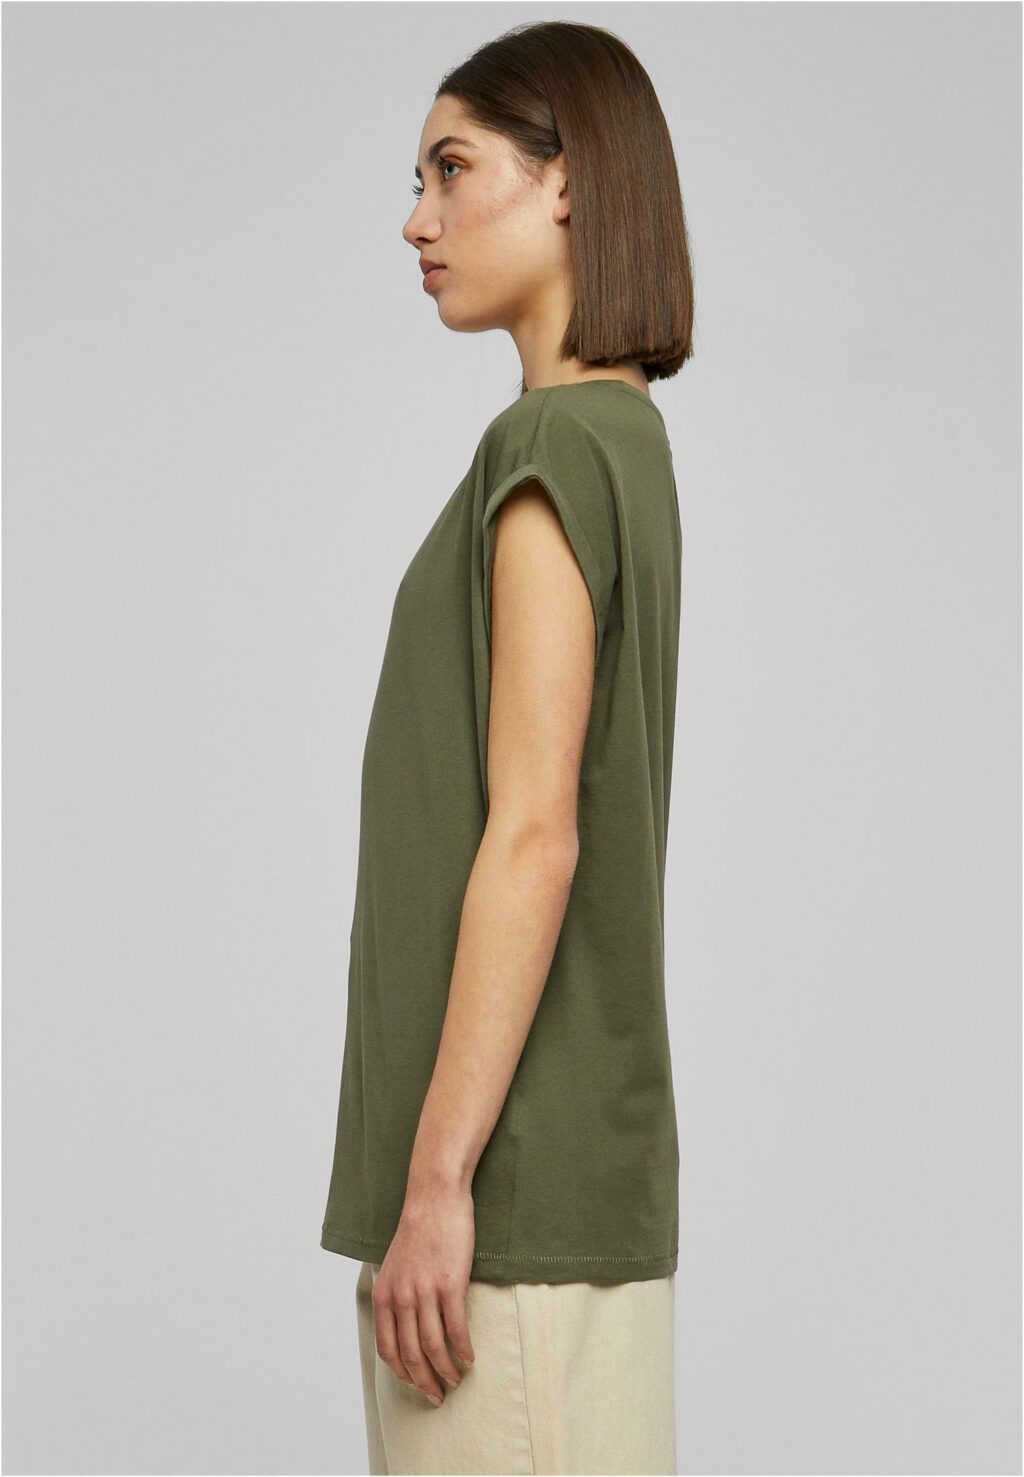 Urban Classics Ladies Extended Shoulder Tee olive TB771